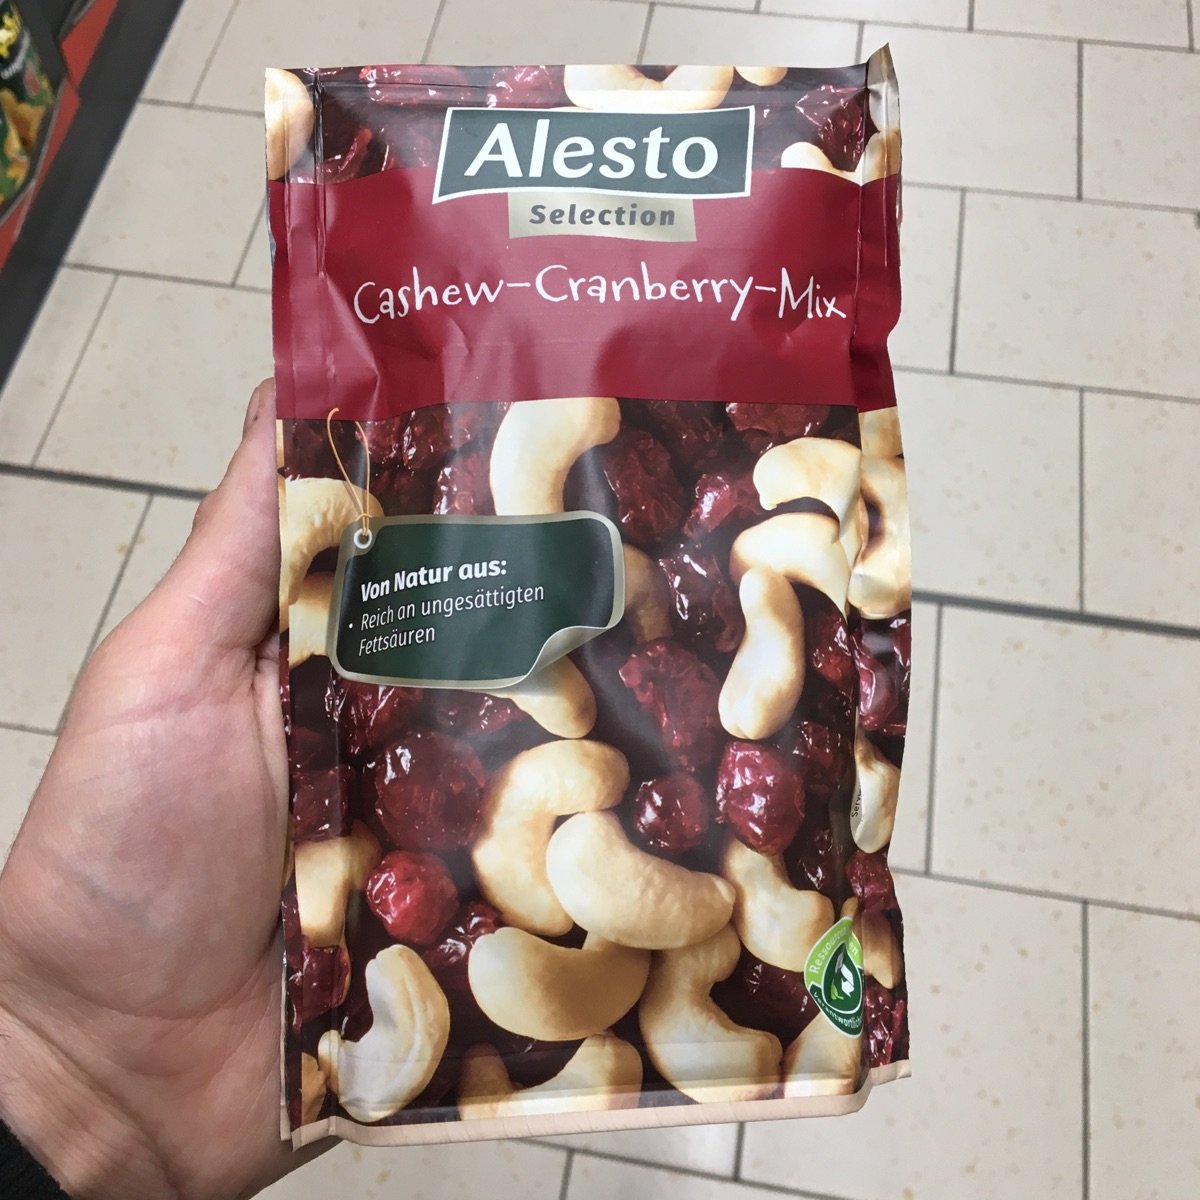 Alesto Cashew Mix Review and abillion Cranberry 